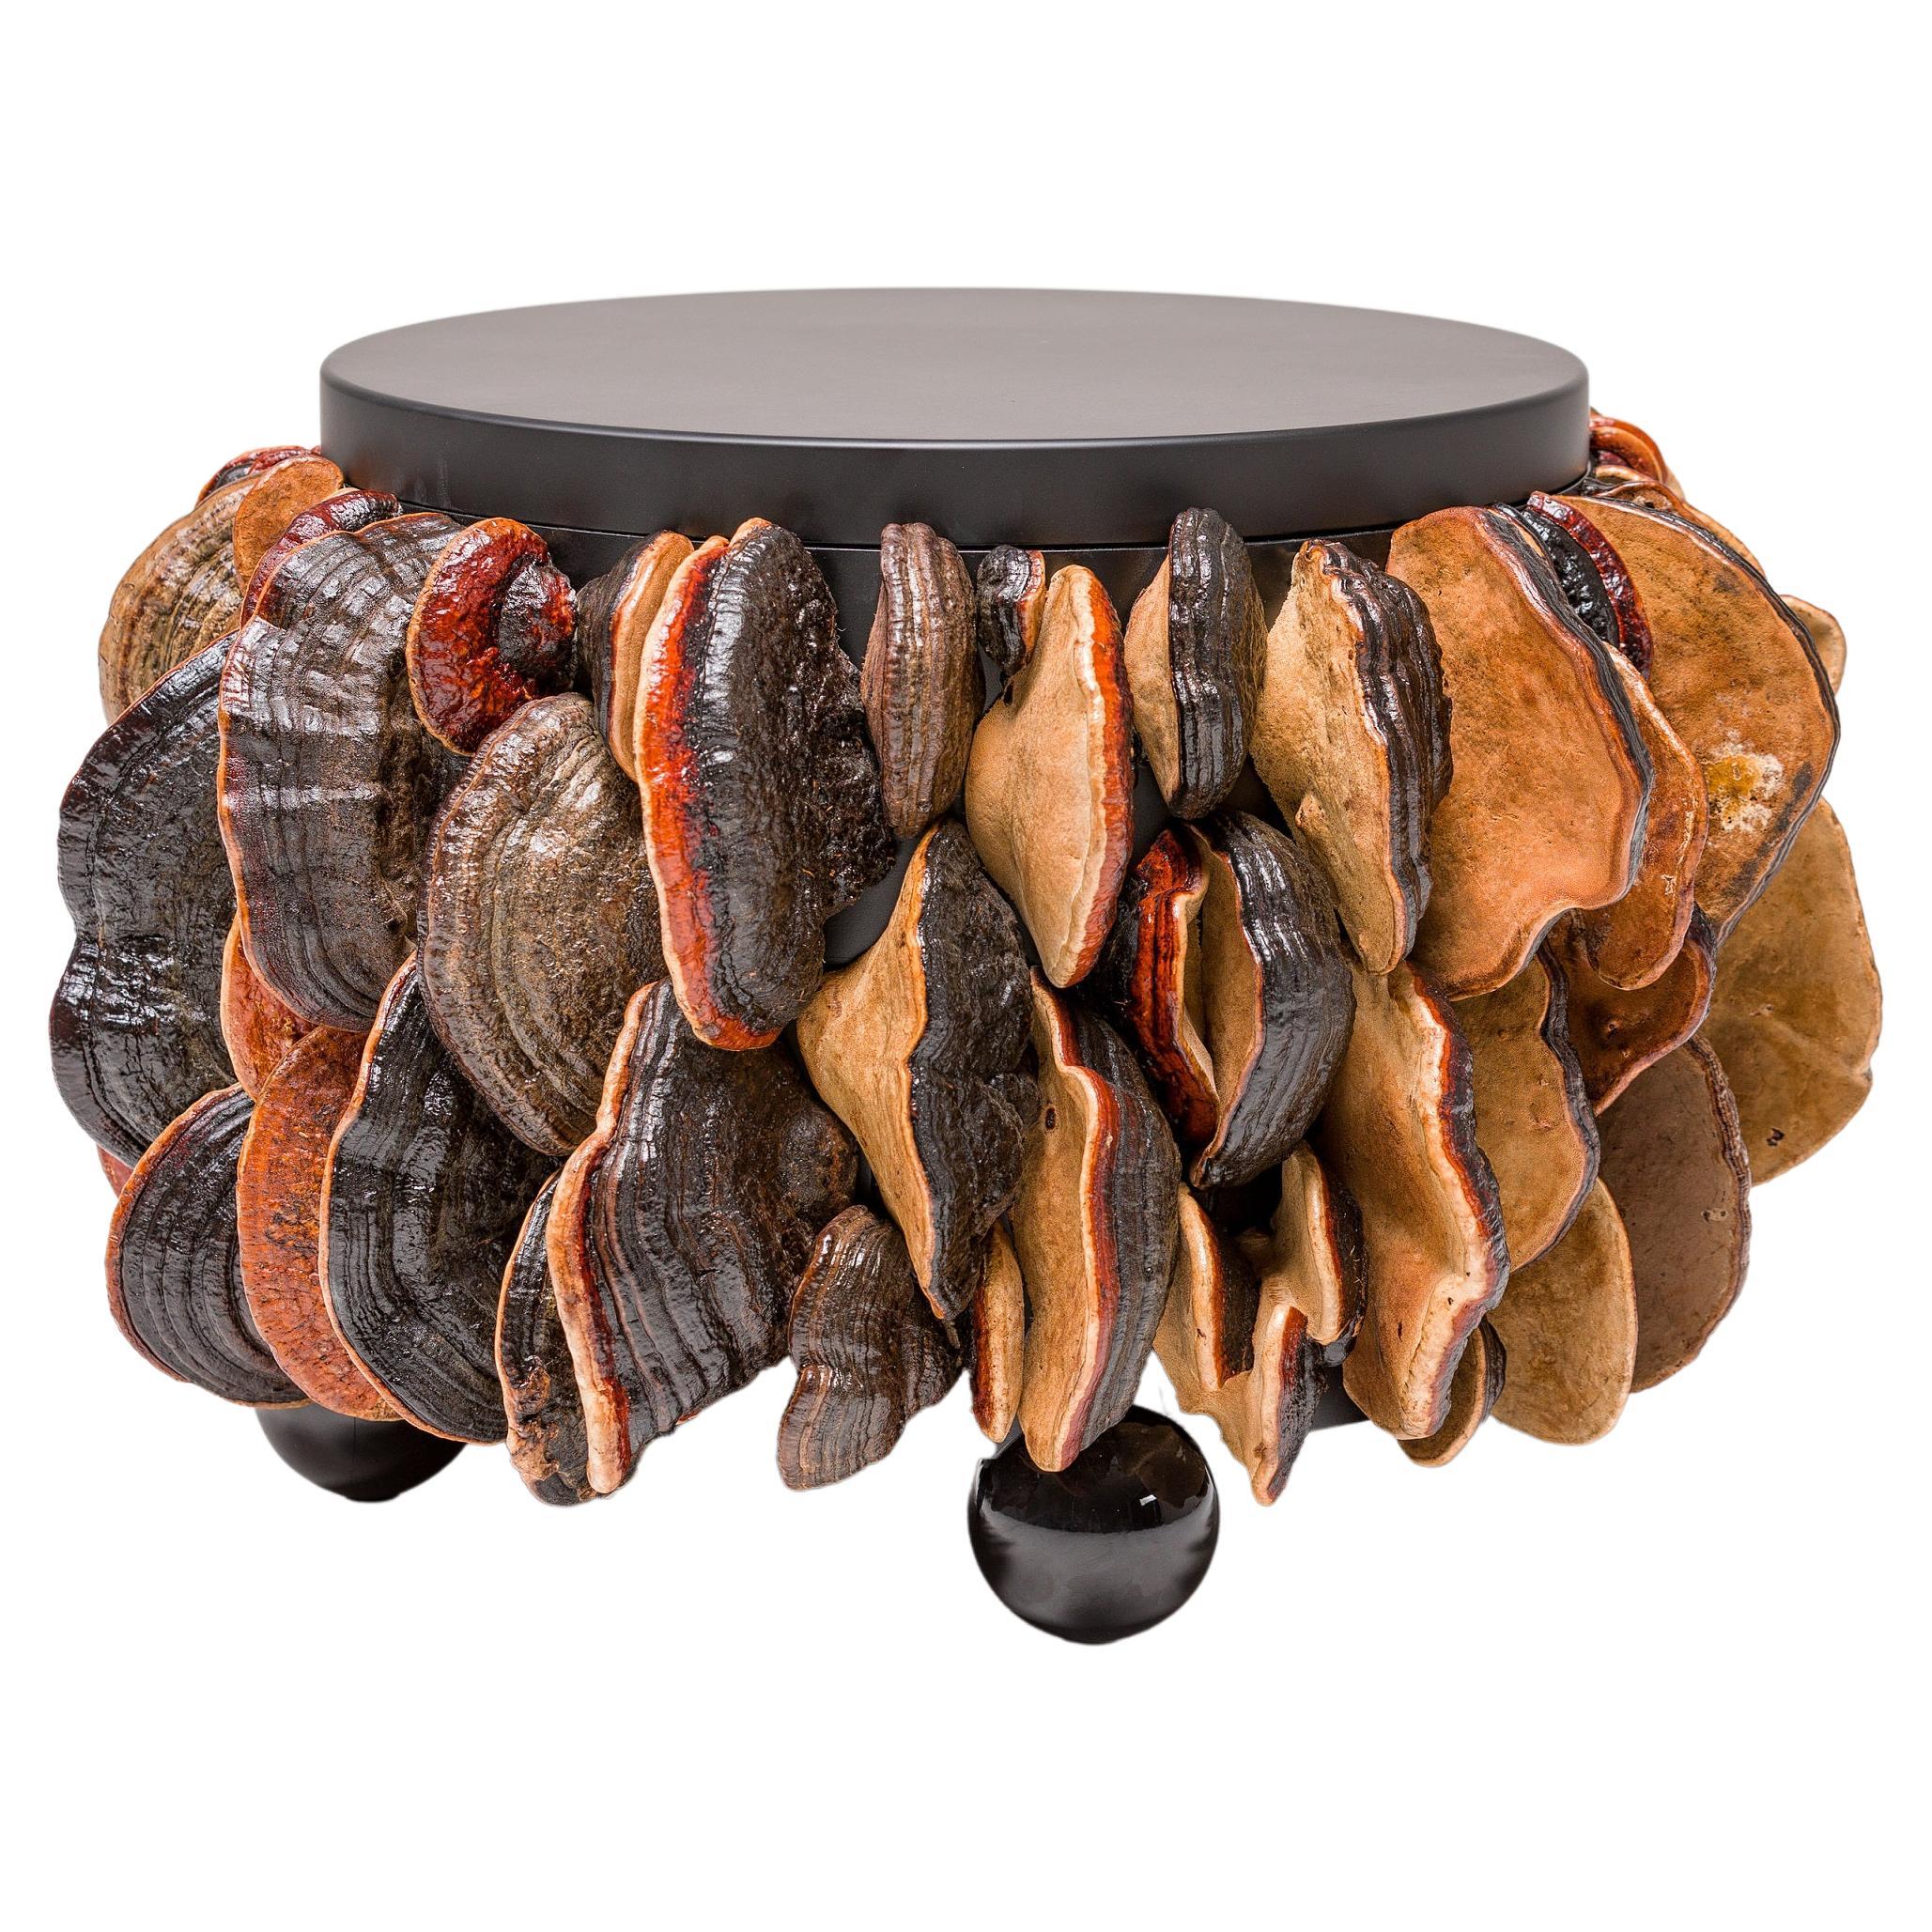 Extravagant Highend Terracotta-Brown Center Table, Collection Mushrooms For Sale